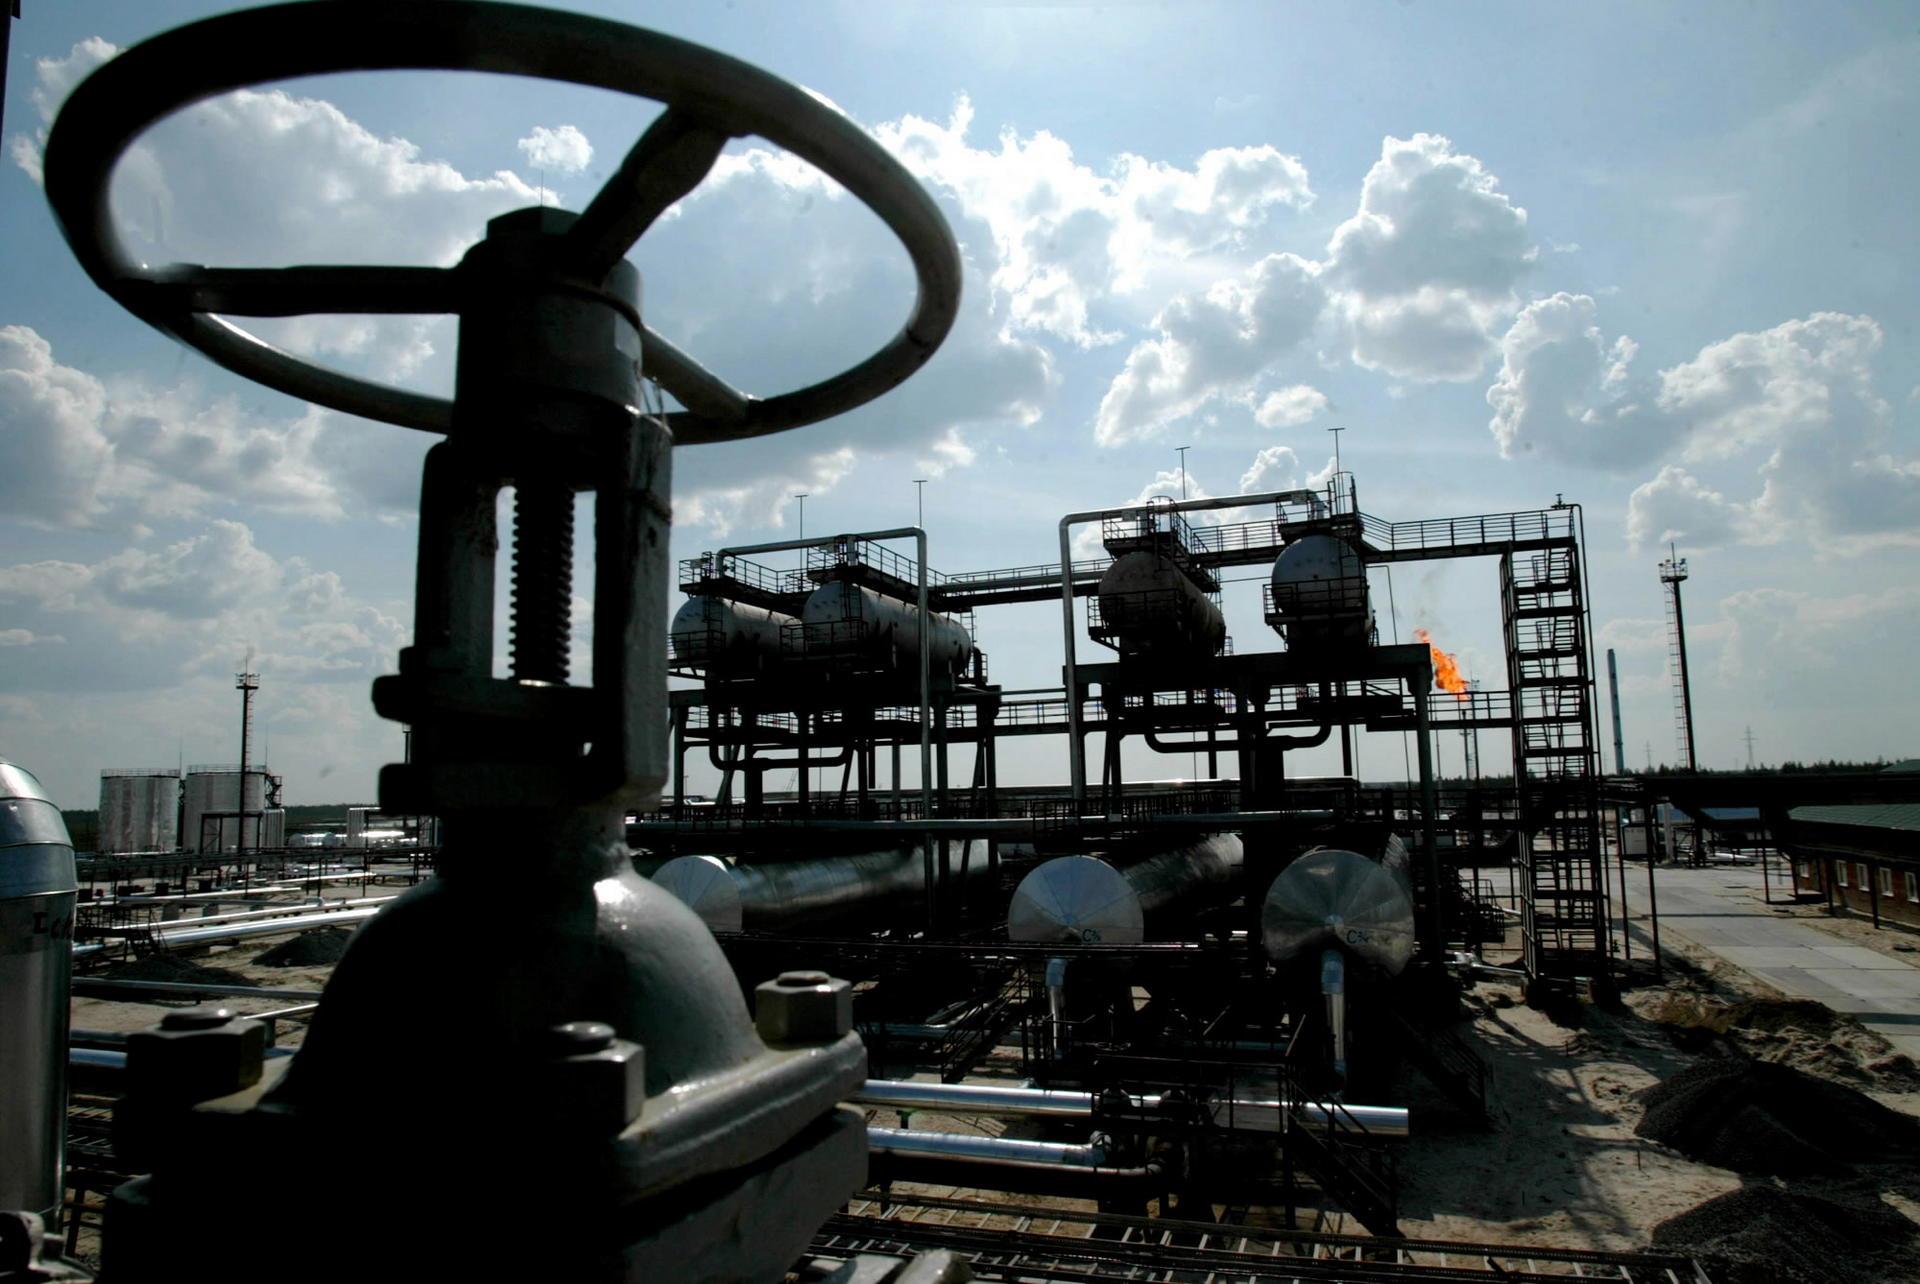 An oil facility outside Noyabrsk City in Siberia, Russia. As an oil exporter, Russia would be a smart place for investors looking to put their money into securities, according to one analyst, because the country would benefit from higher oil prices and would be minus the geopolitical risk attached to Middle East markets.Photo: Bloomberg